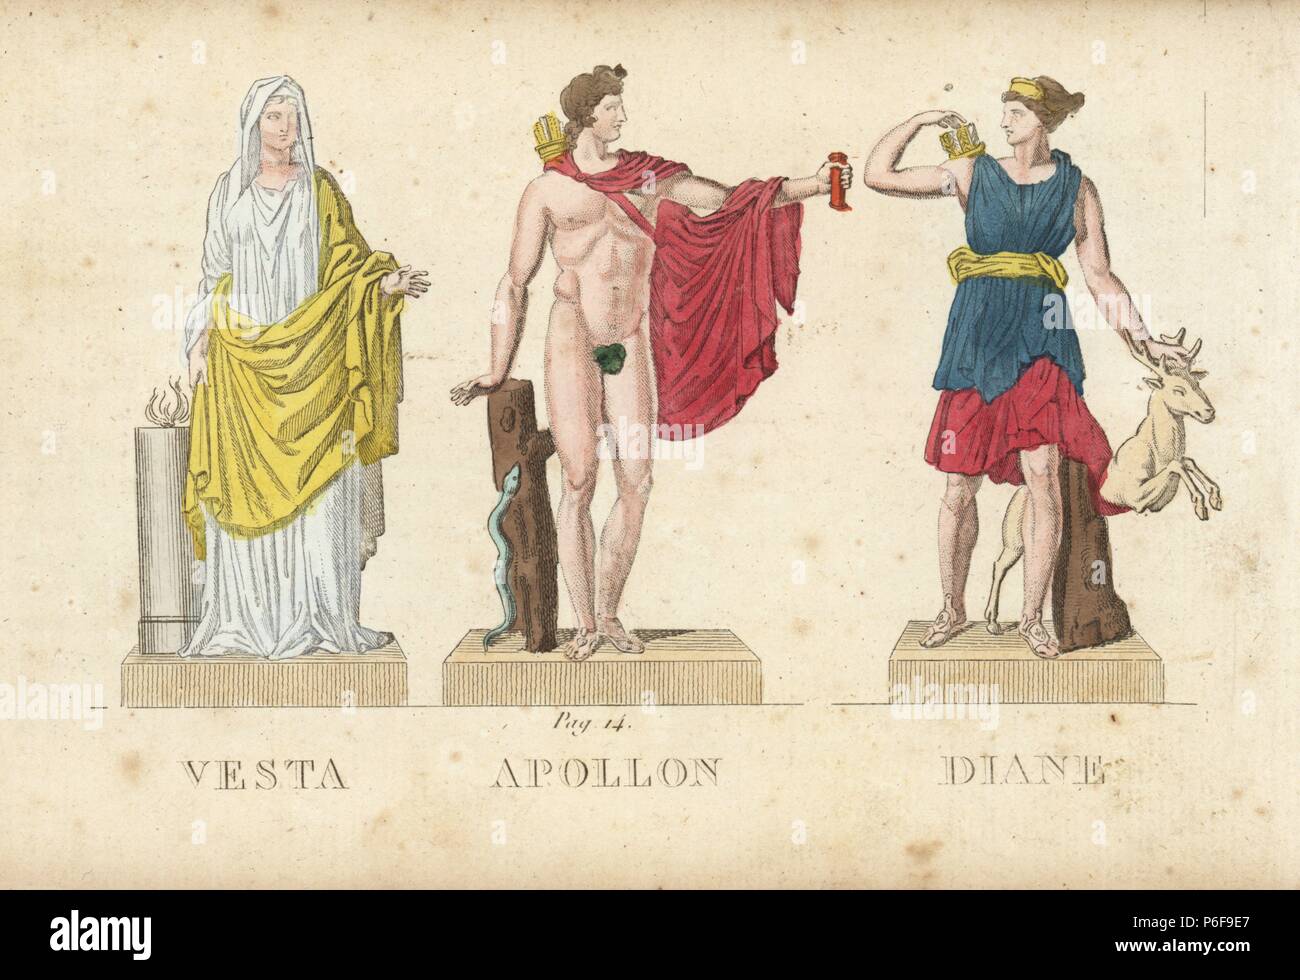 Vesta, Apollo and Diana, Roman god and goddesses of the hearth, poetry and music, and the hunt. Handcoloured copperplate engraving engraved by Jacques Louis Constant Lacerf after illustrations by Leonard Defraine from 'La Mythologie en Estampes' (Mythology in Prints, or Figures of Fabled Gods), Chez P. Blanchard, Paris, c.1820. Stock Photo